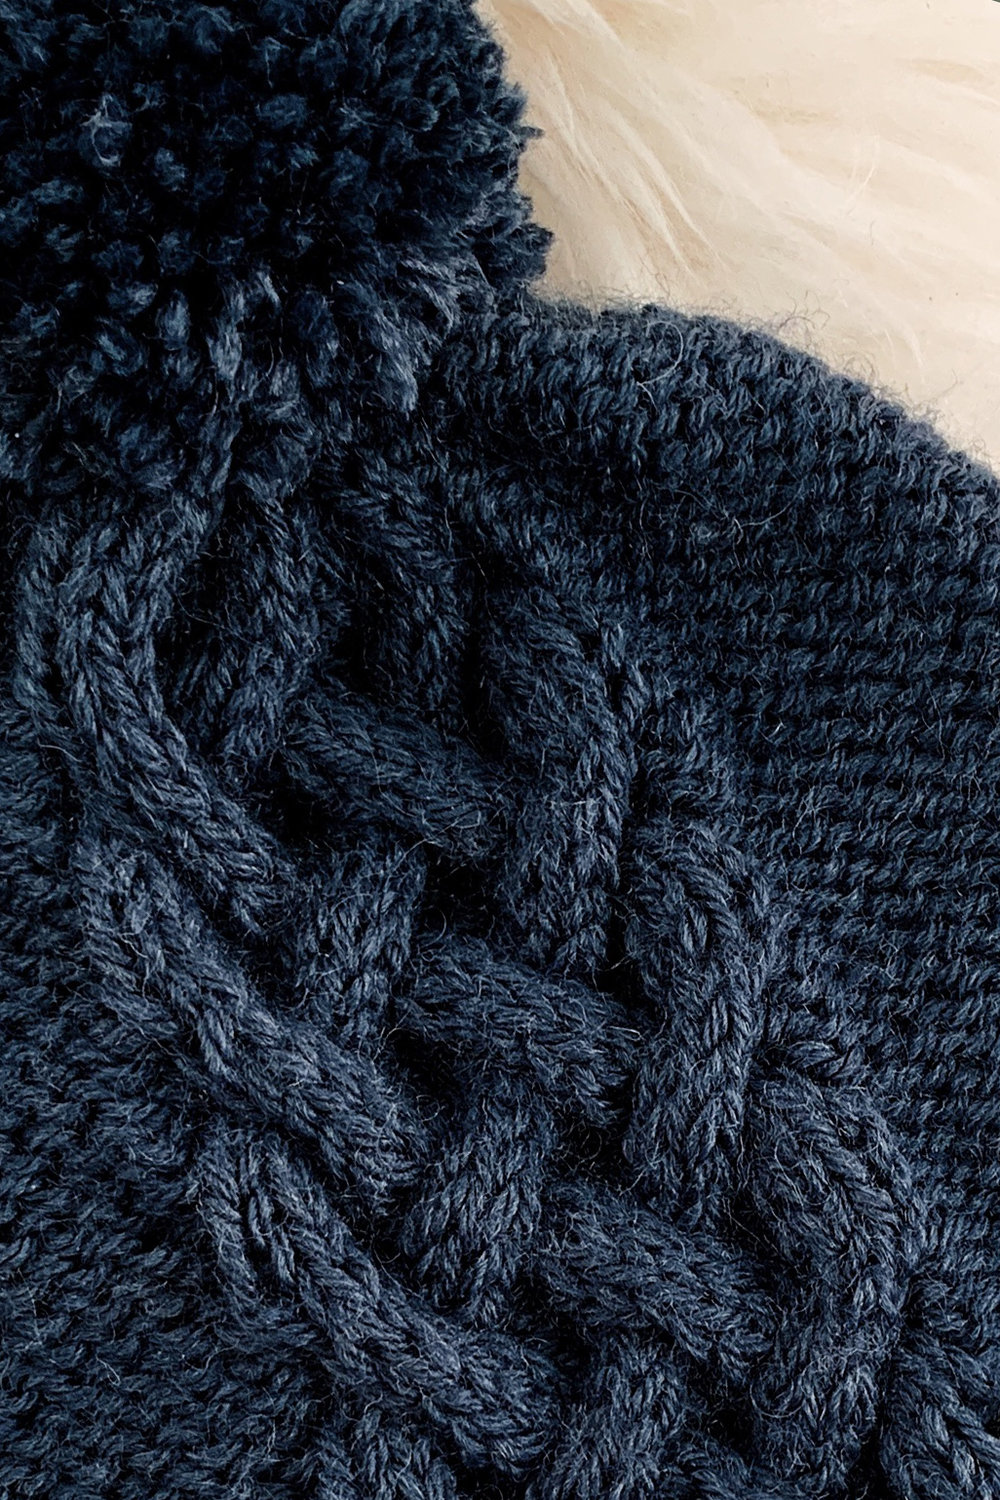 Interwoven Hat pattern by Two of Wands